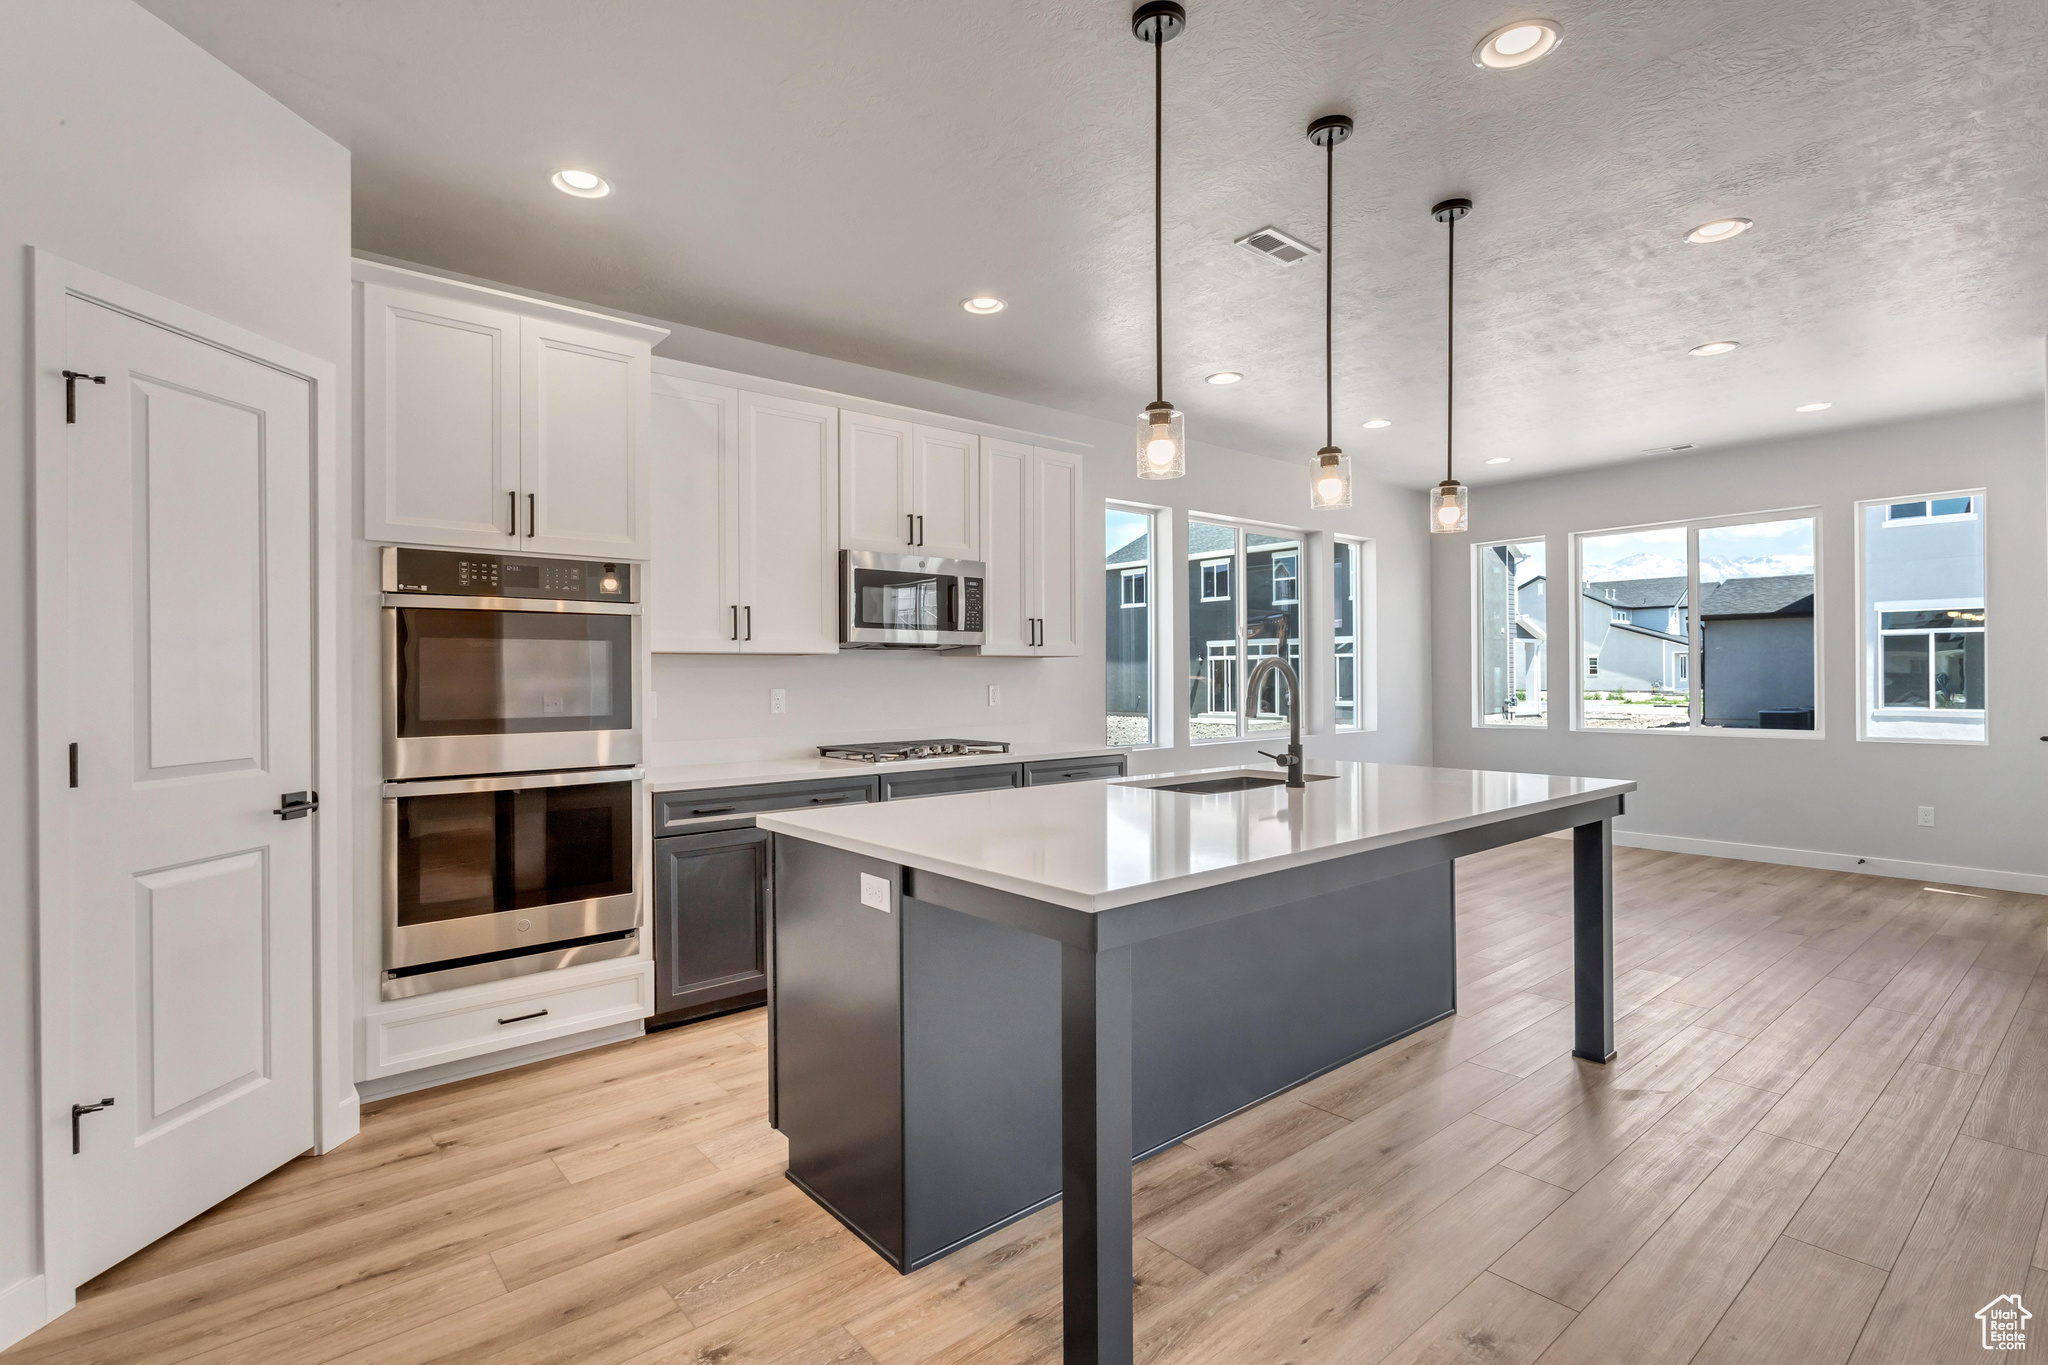 PHOTOS FROM A SIMILAR HOME. COLORS AND SELECTIONS WILL VARY.  Kitchen with white cabinets, sink, stainless steel appliances, and decorative light fixtures